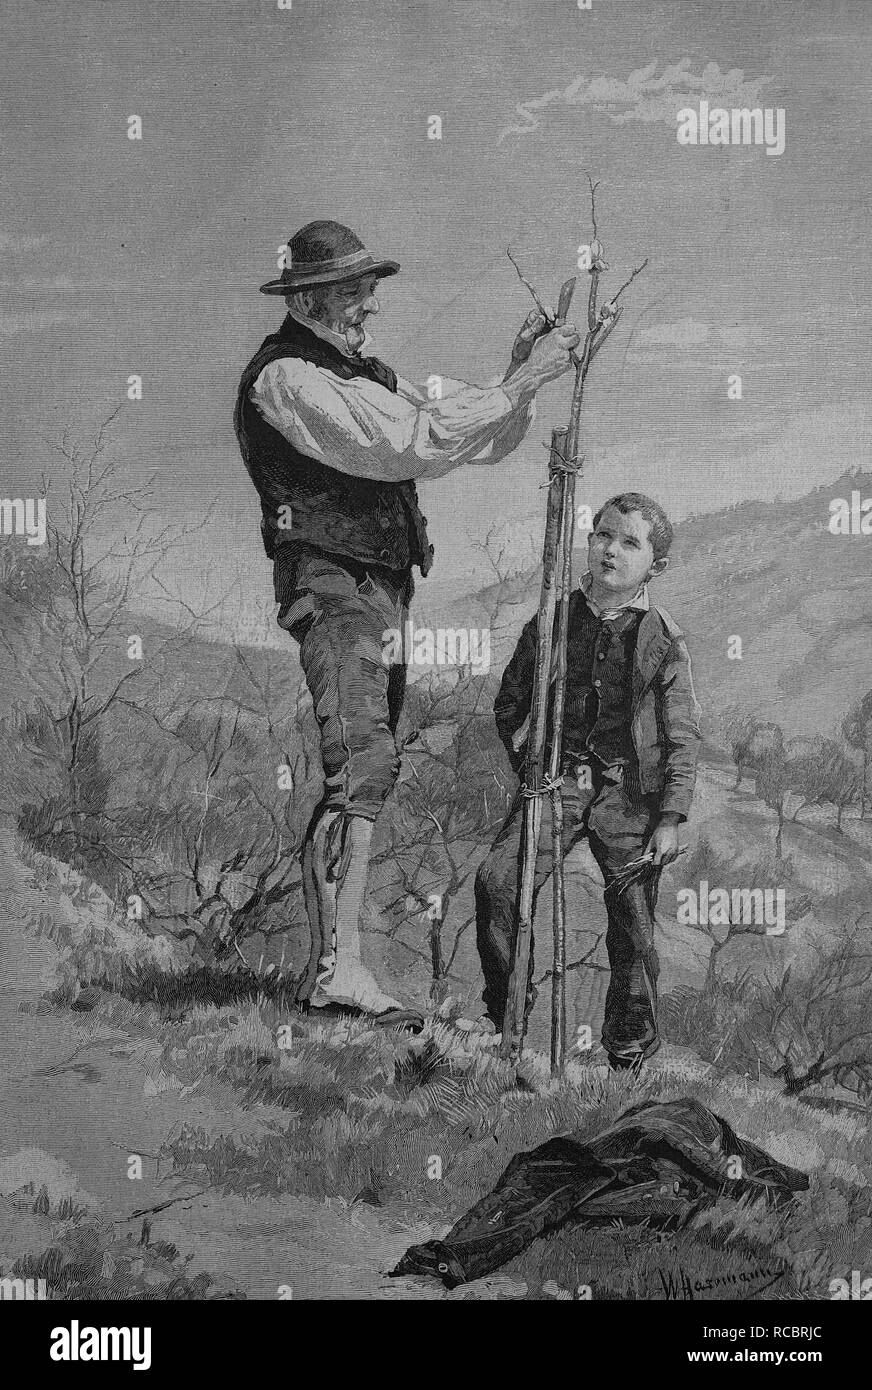 Teaching how to graft a tree, historical engraving, 1880 Stock Photo